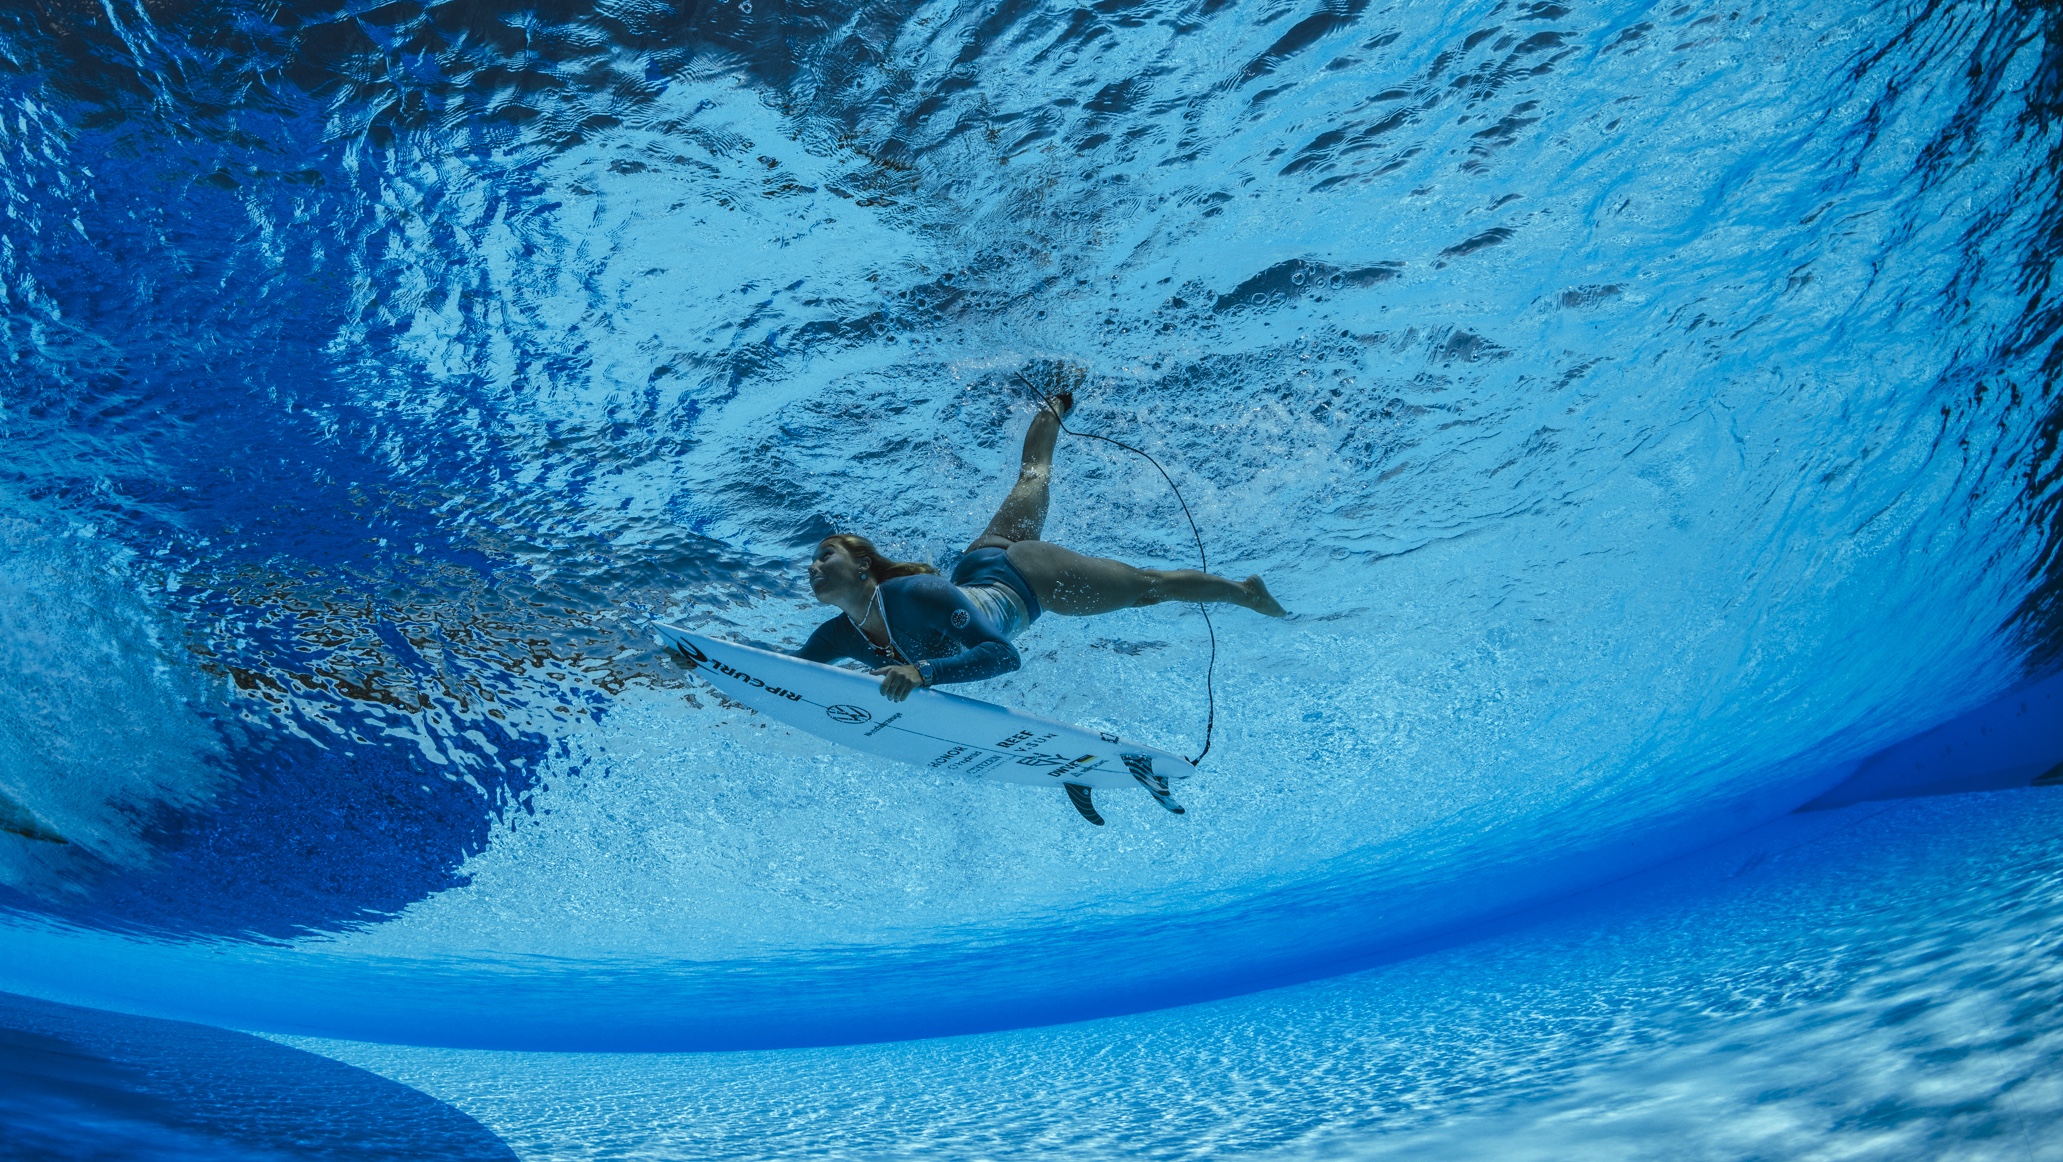 Exploring customer incentives in wave pools